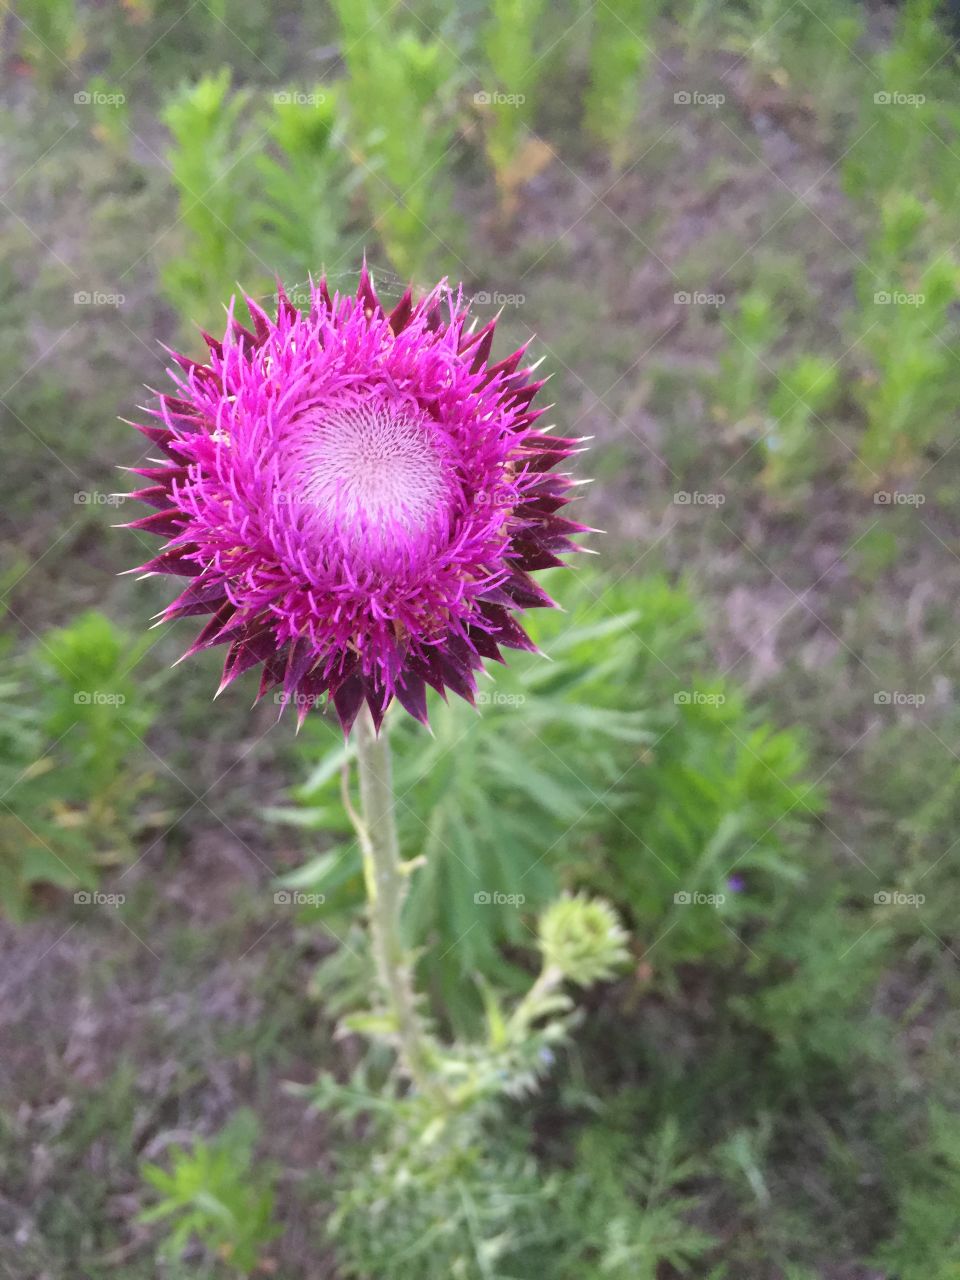 Thistle at dusk.